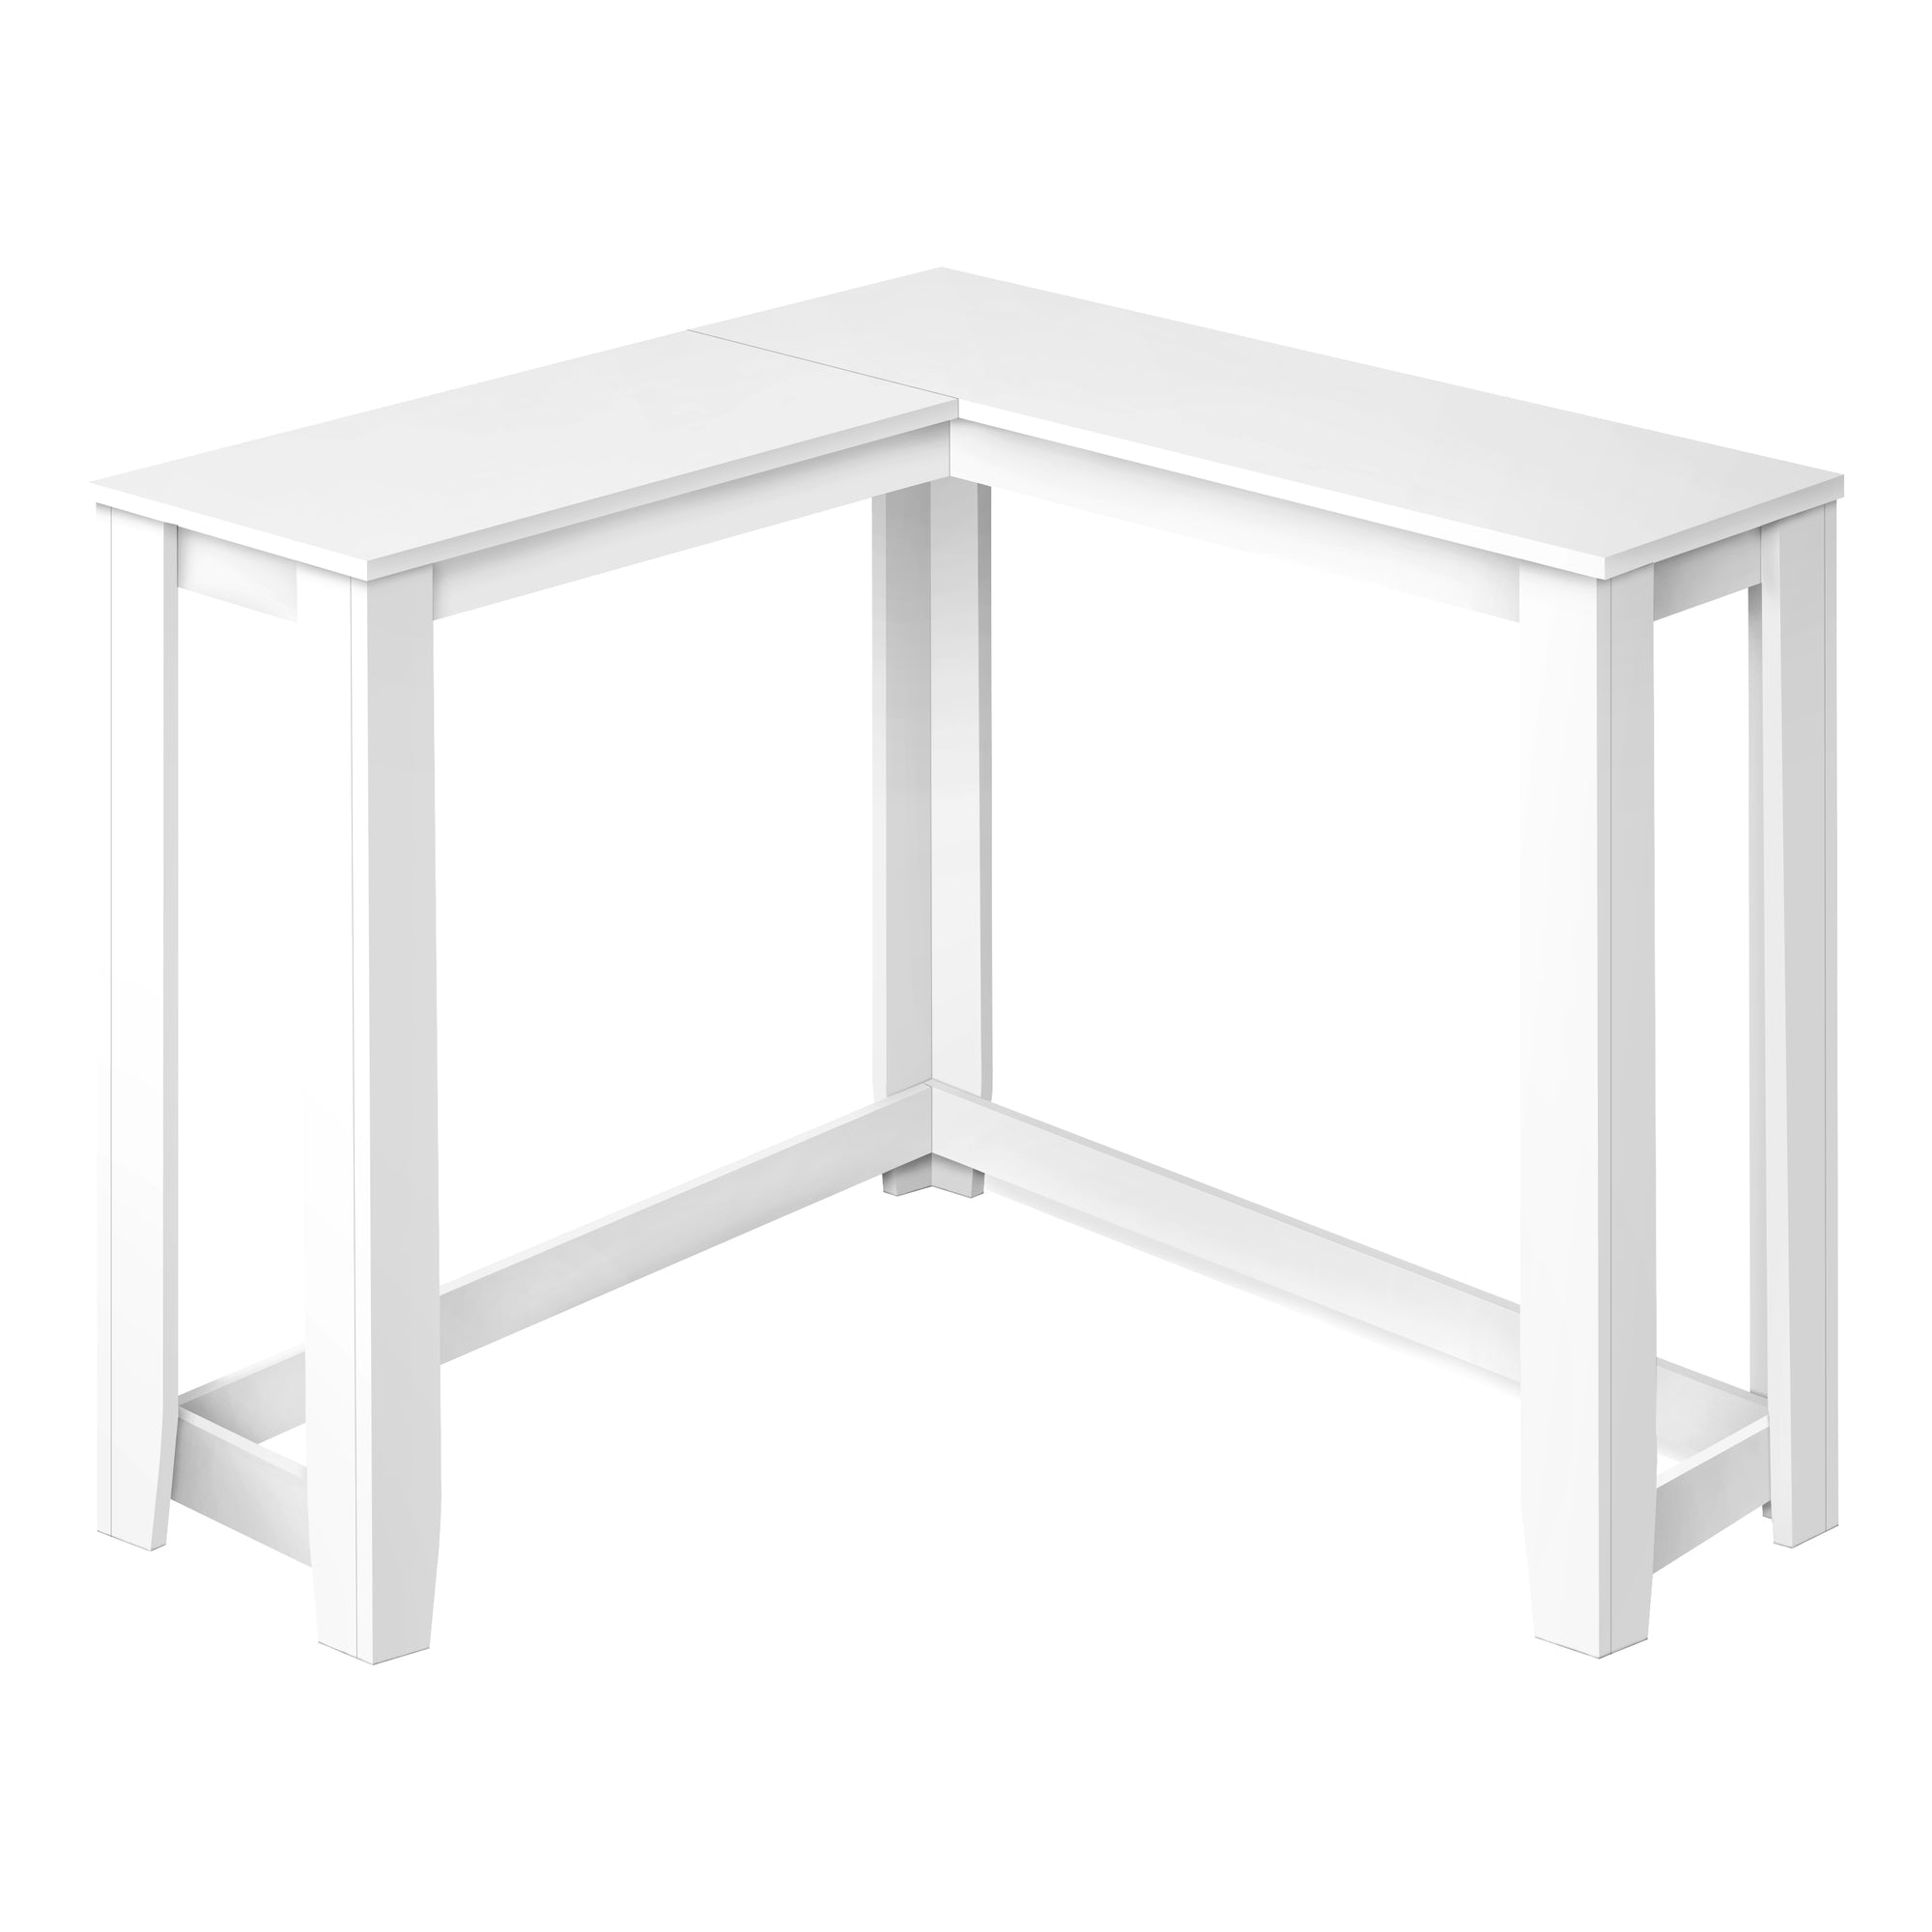 MN-983656    Accent Table, Console, Entryway, Narrow, Corner, Living Room, Bedroom, Laminate, White, Contemporary, Modern